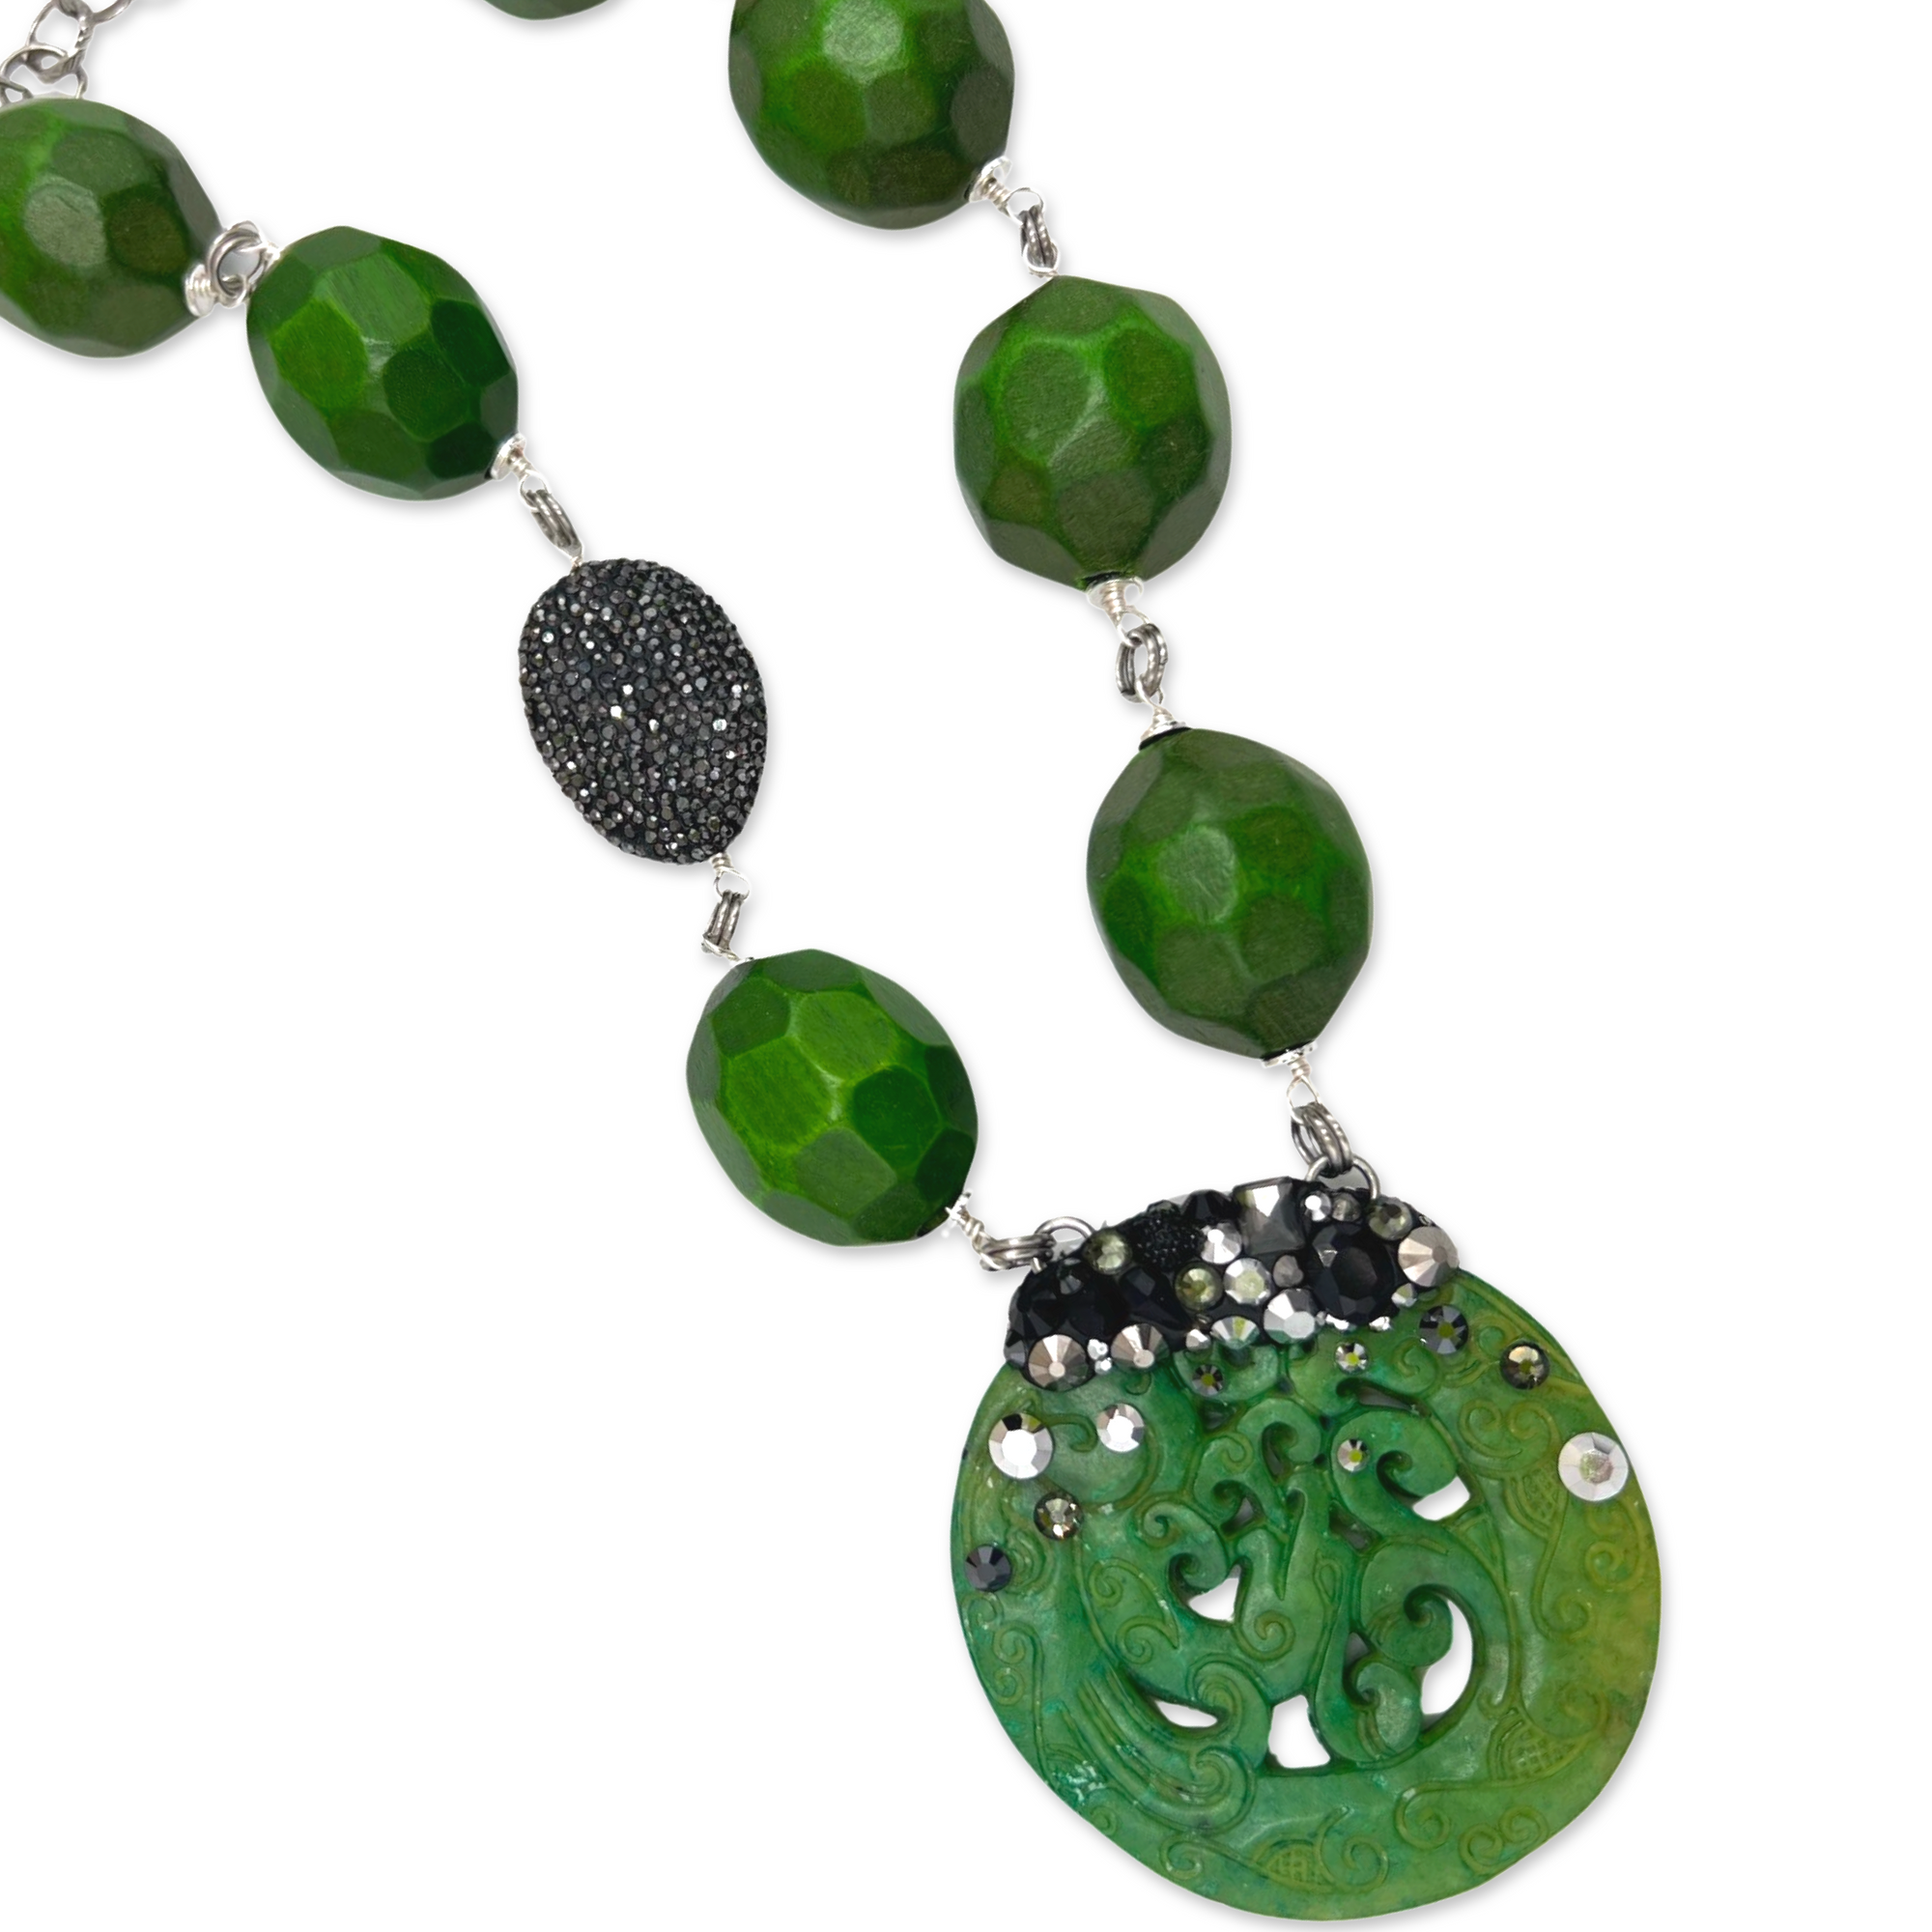 Green Billow Necklace